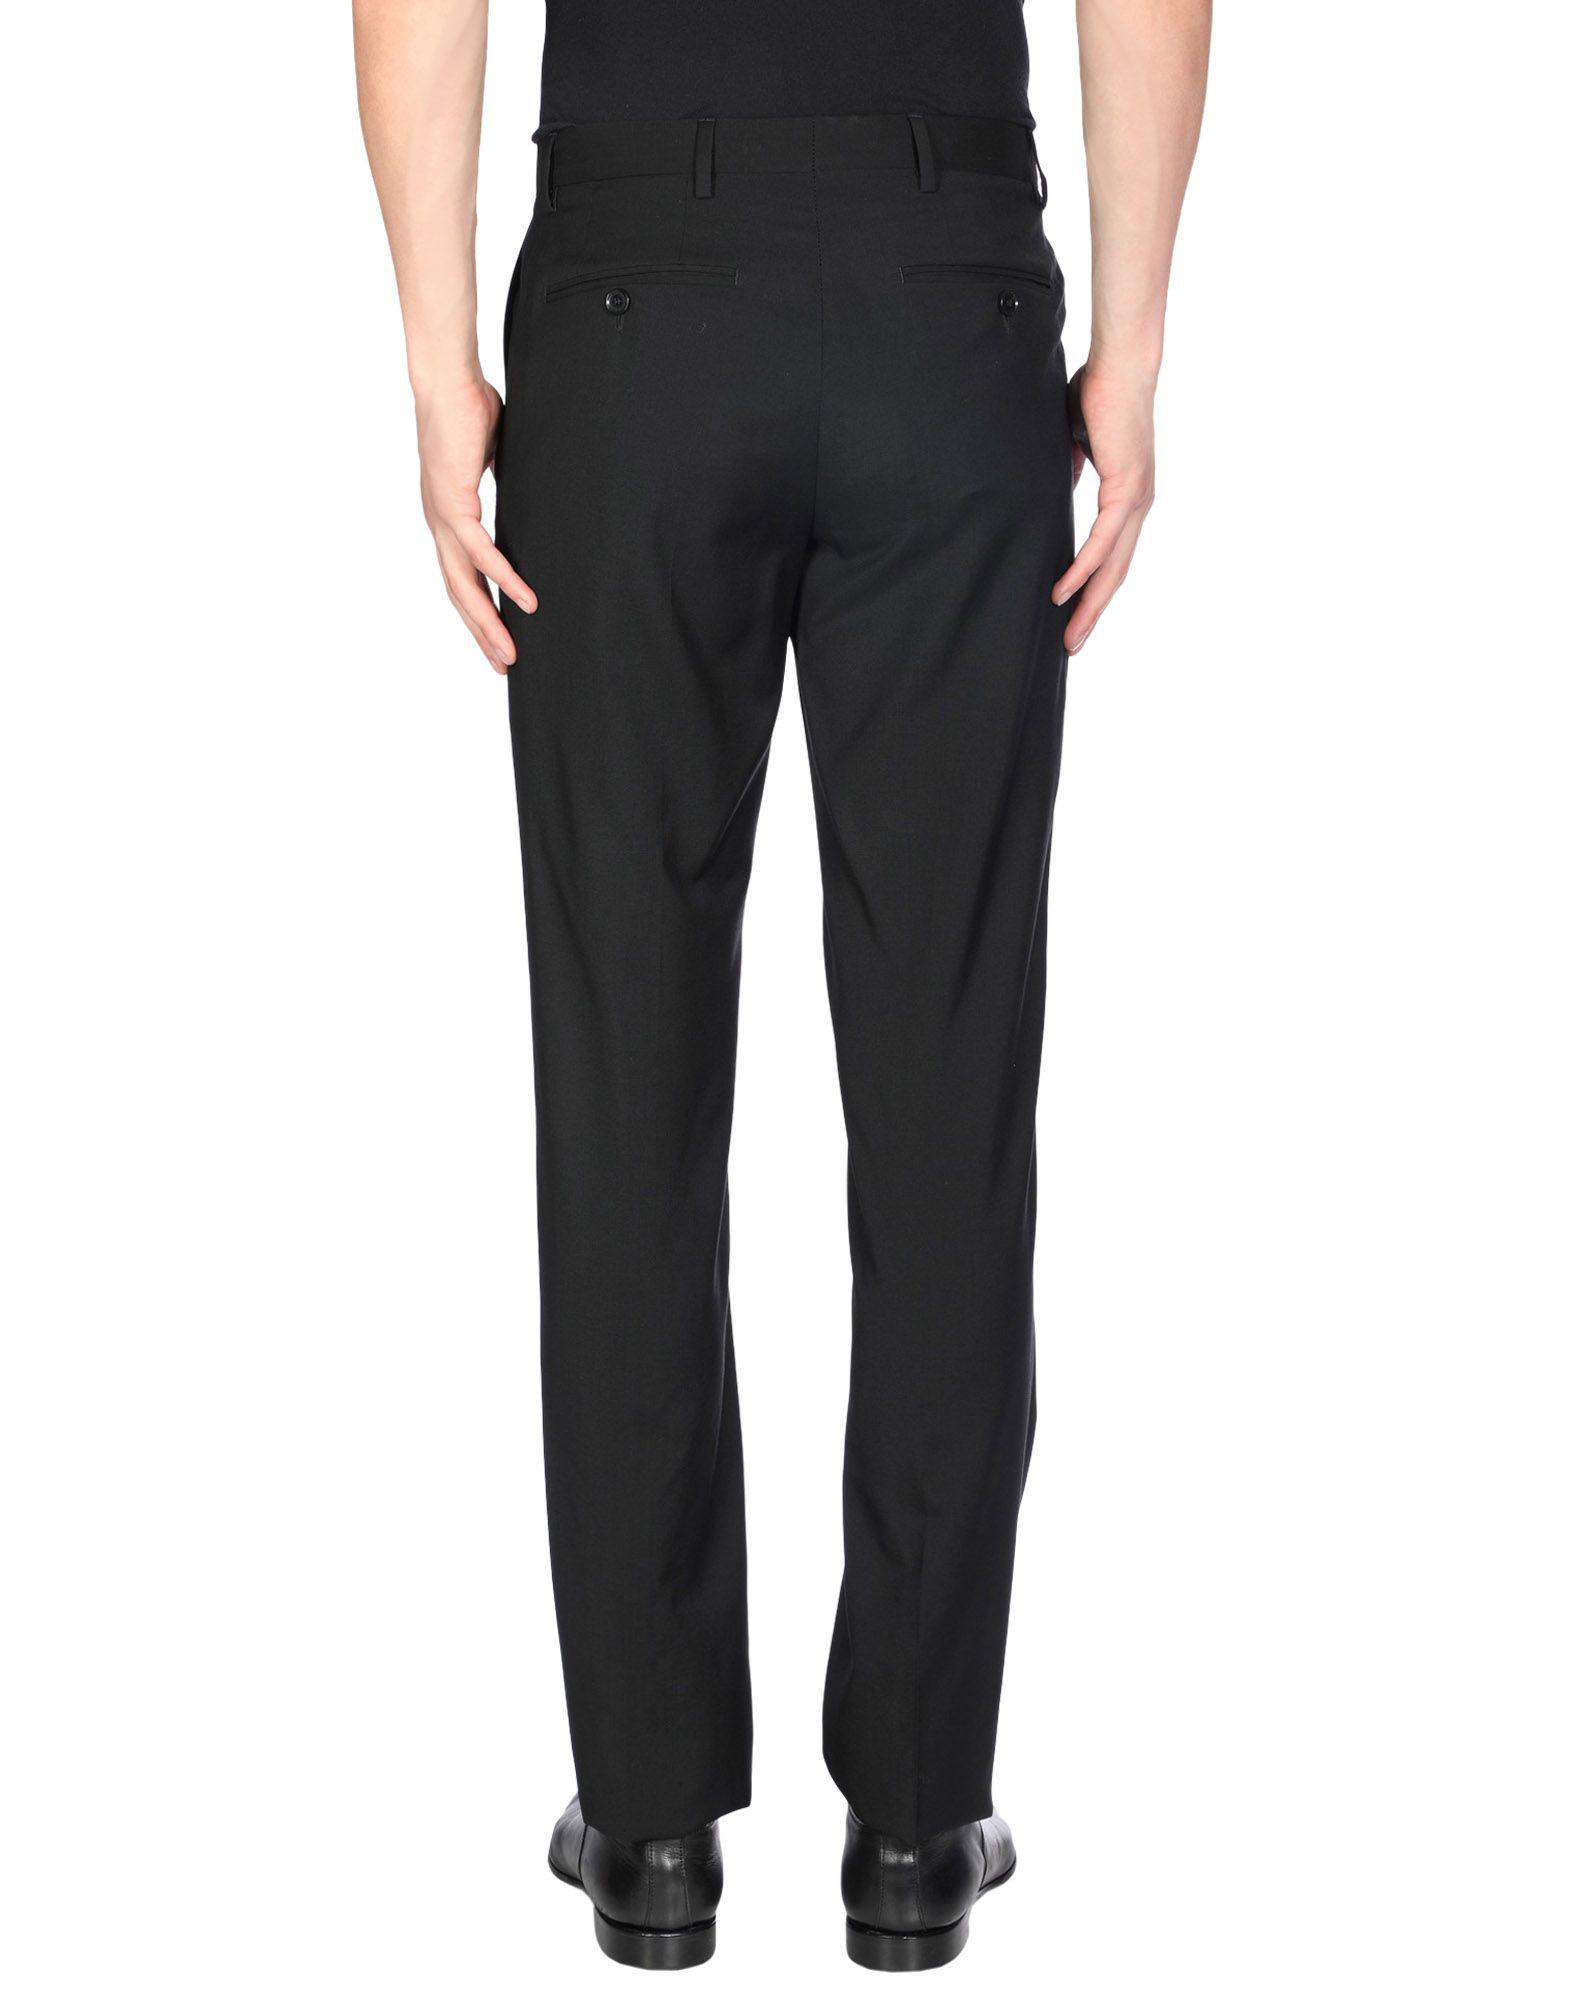 Burberry Wool Casual Pants in Black for Men - Lyst